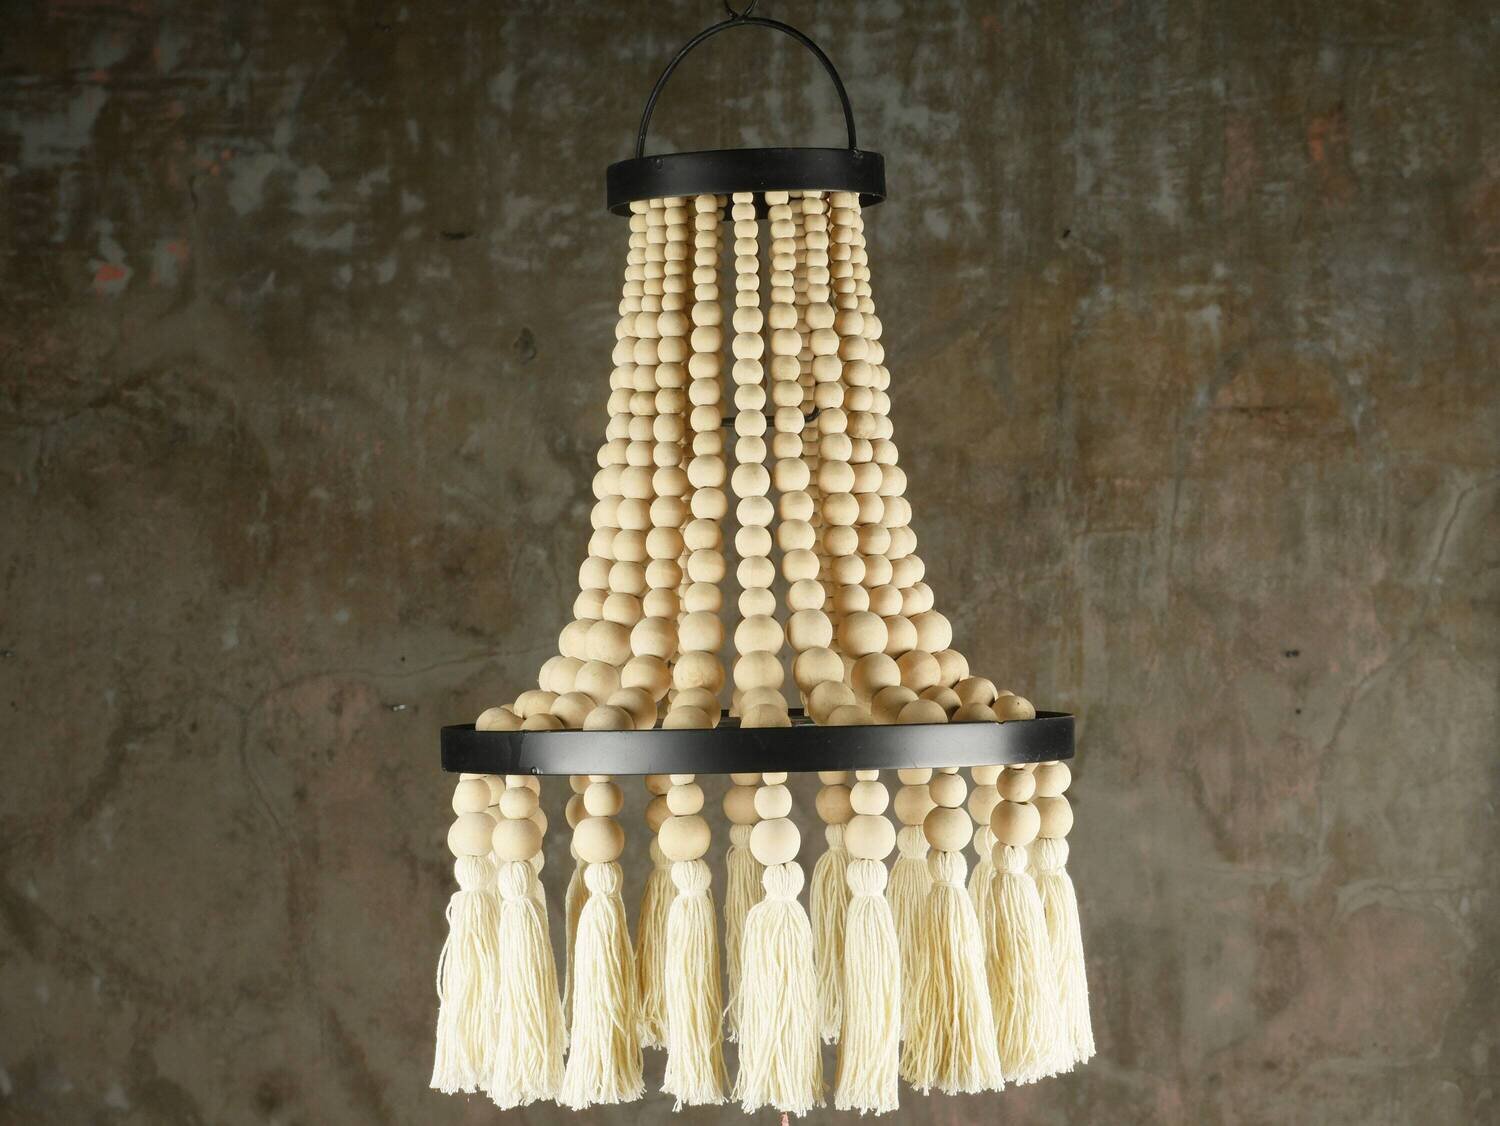 The Tassels and Wood beaded Lampshade - Beaded Chandelier - Bohemian Chandelier - Natural Lampshade - Wooden Chandelier - Boho Lampshade